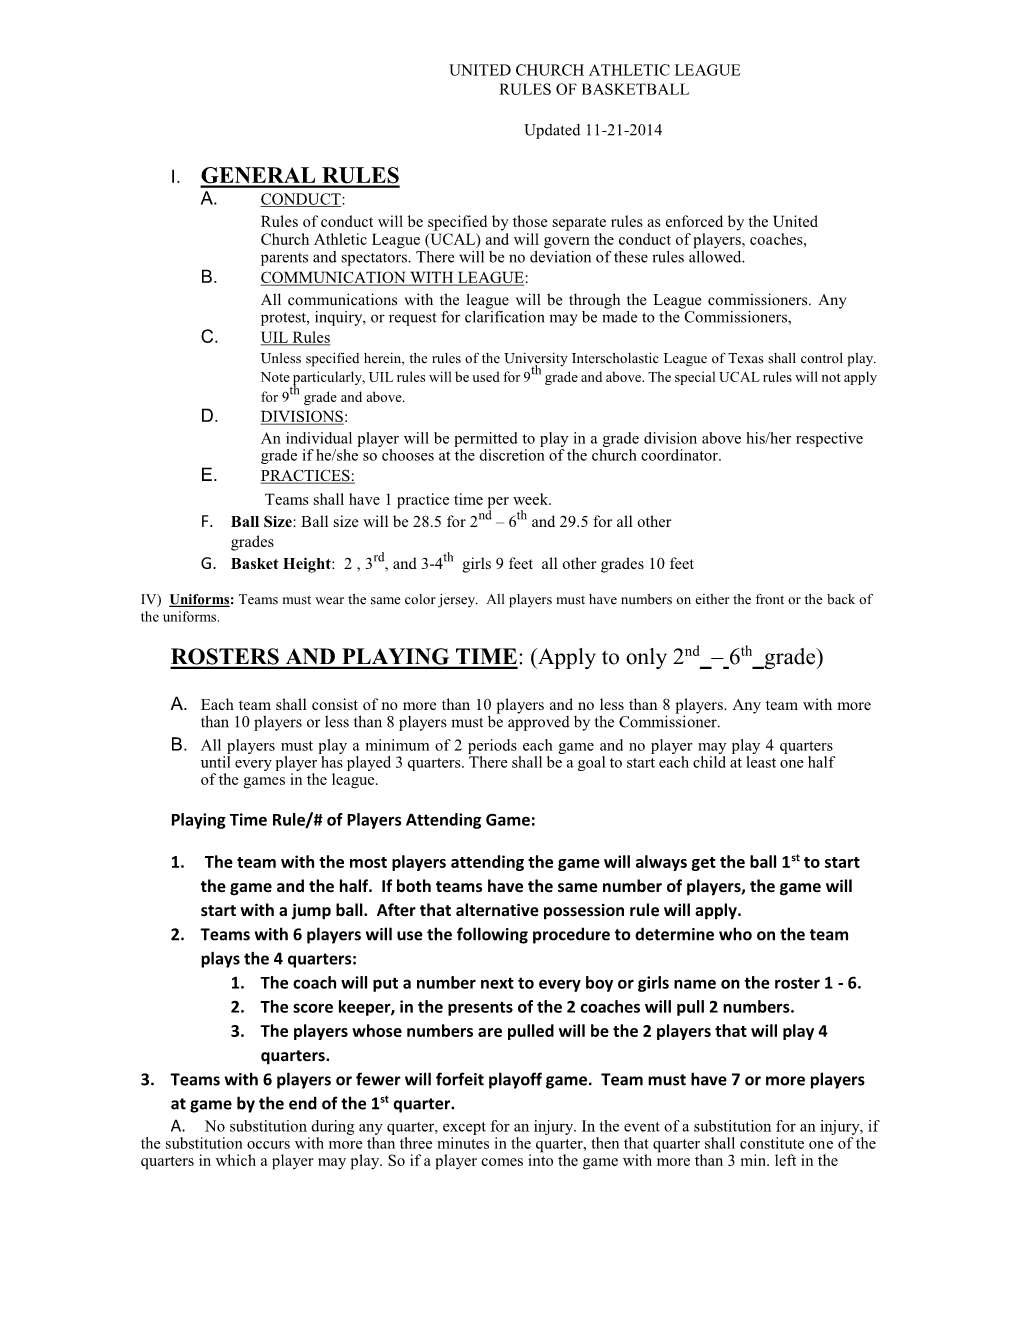 UCAL Basketball Rules Updated 11-14-2013.Docx